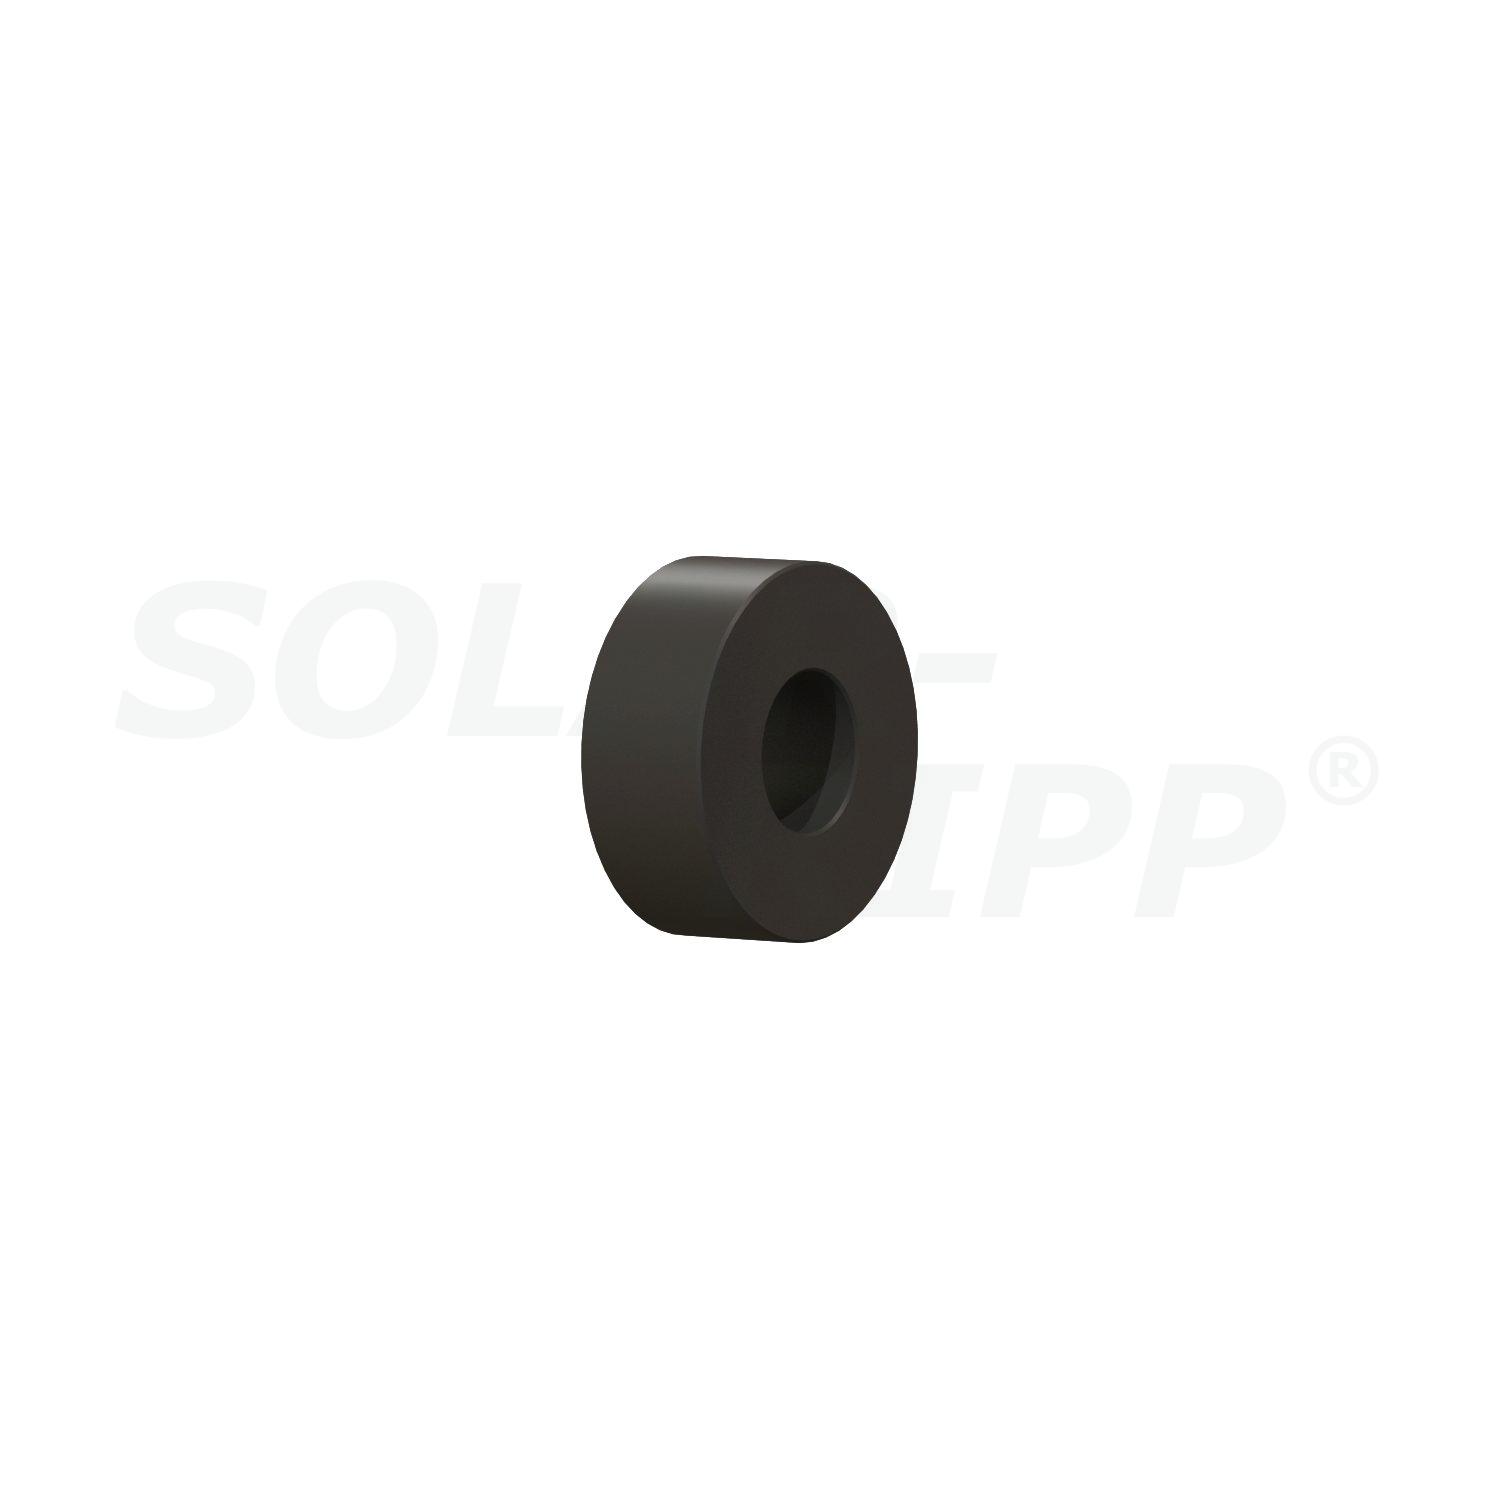 SOLAR-RIPP ® flat seal for hand tap and threaded plug